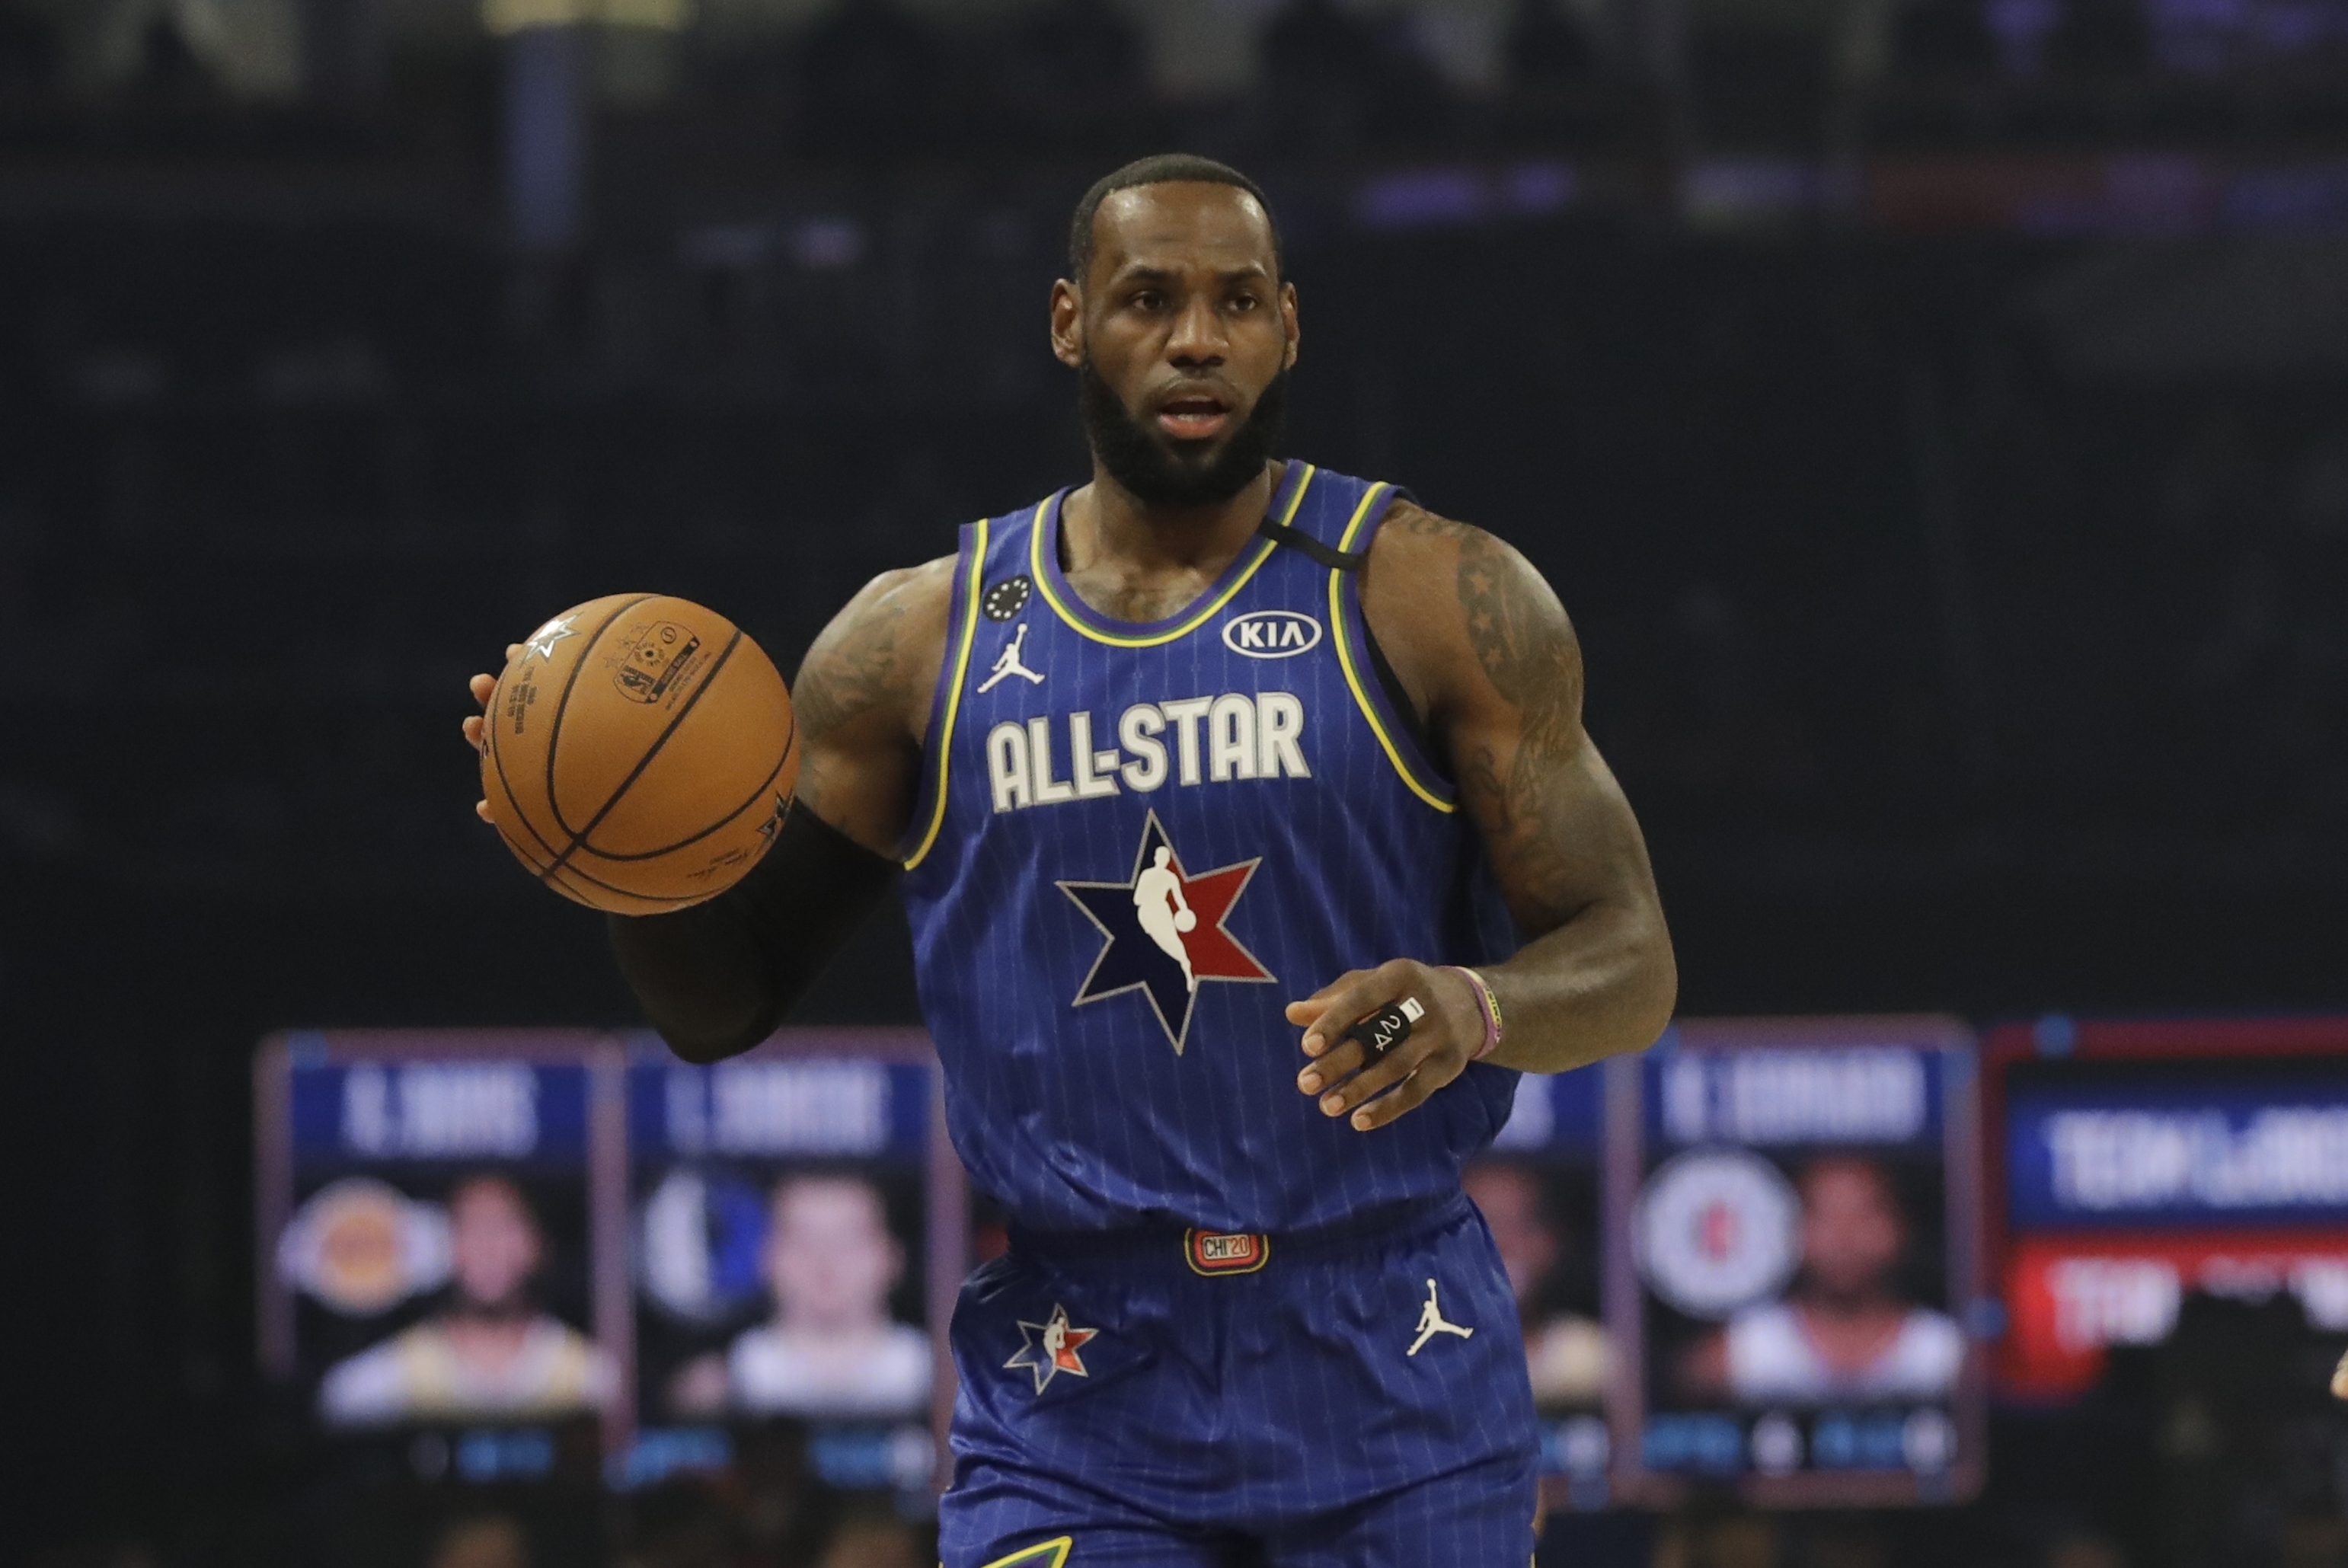 Nba All Star Game 2021 Free Live Stream 3 7 21 Watch Team Lebron Vs Team Durant Online Time Tv Channel Nj Com